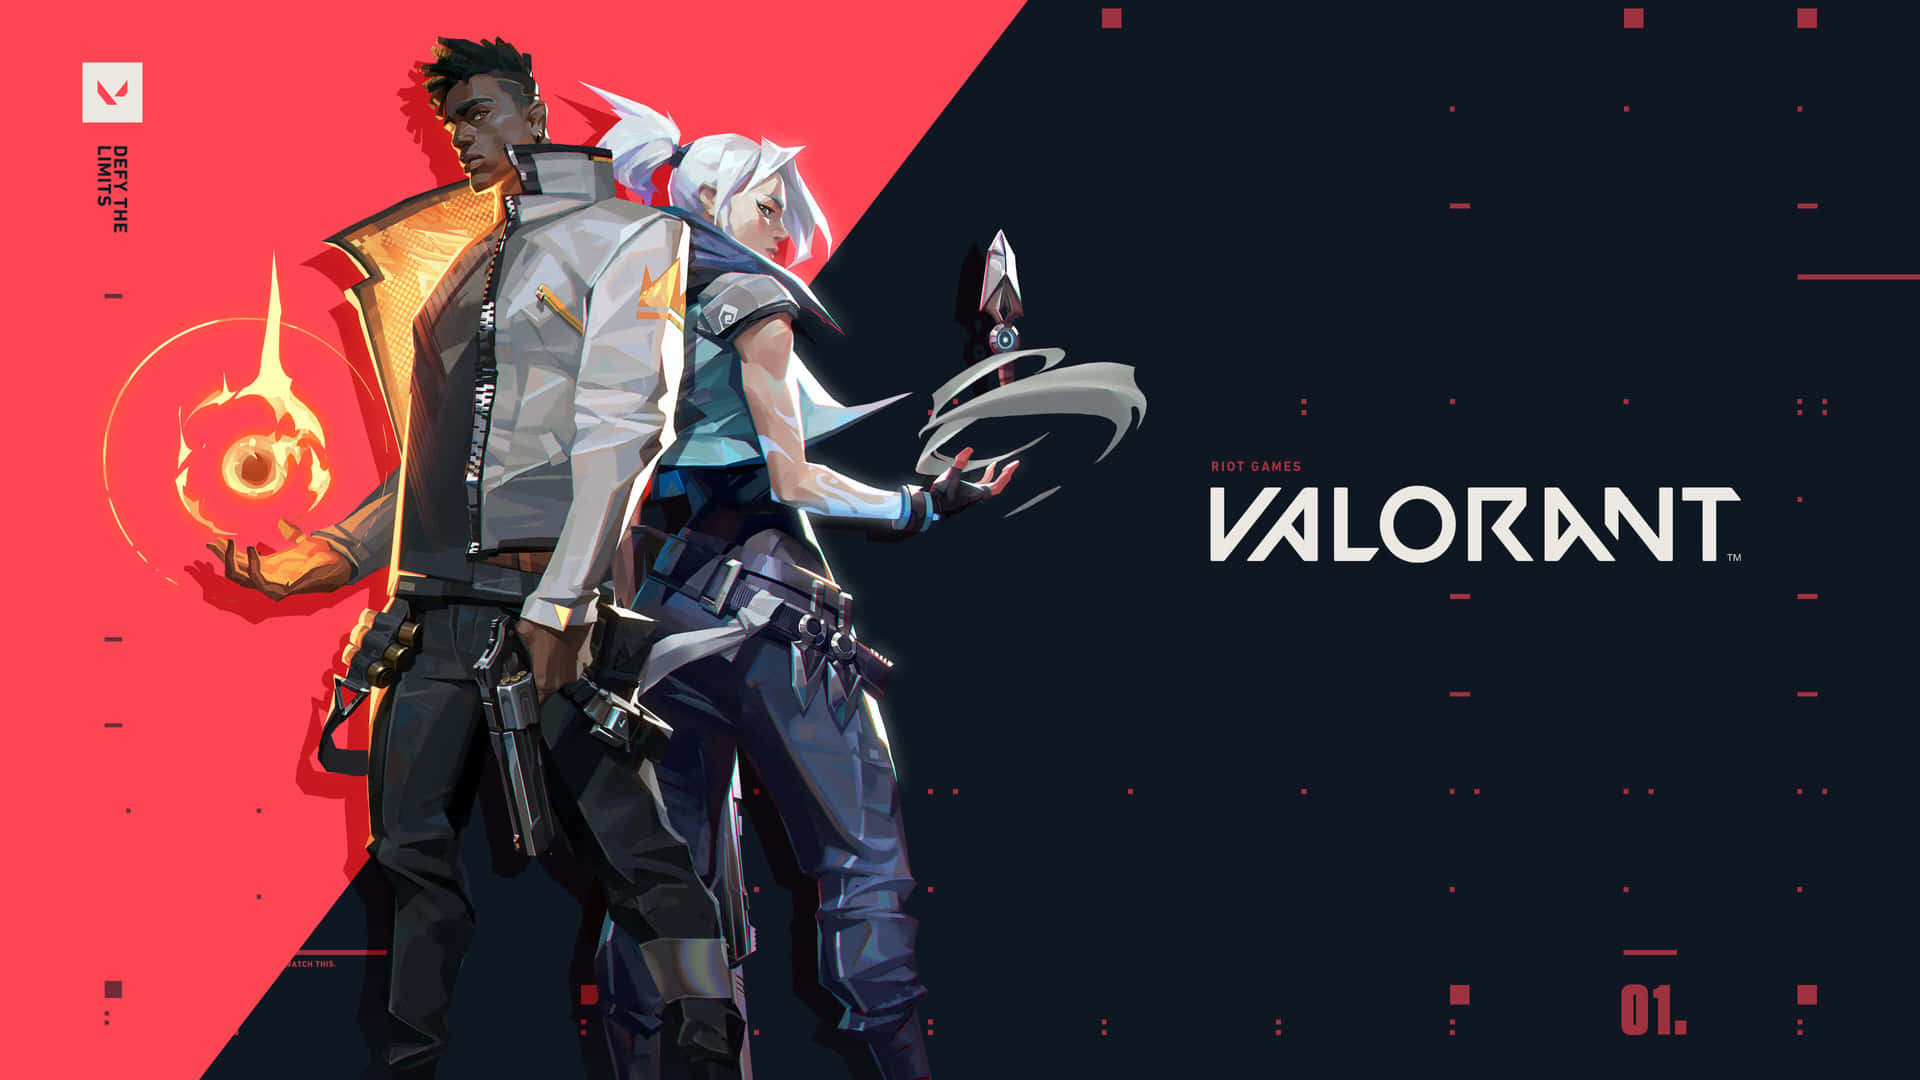 Valorant - A Game With Two Characters